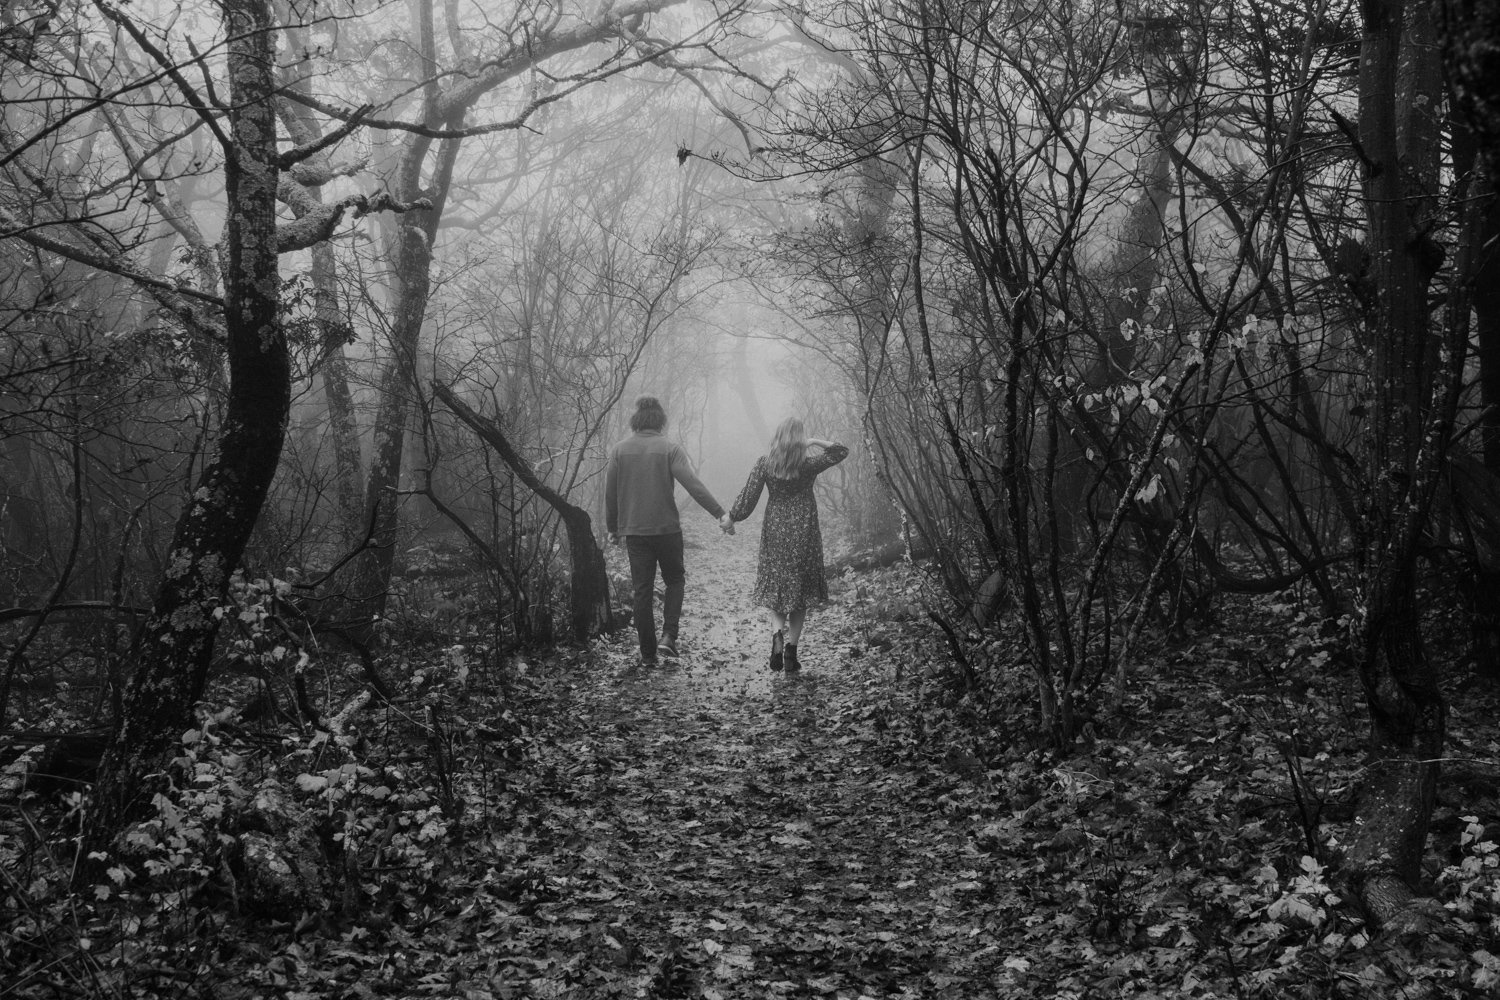 Couple walking through a foggy mountain trail holding hands